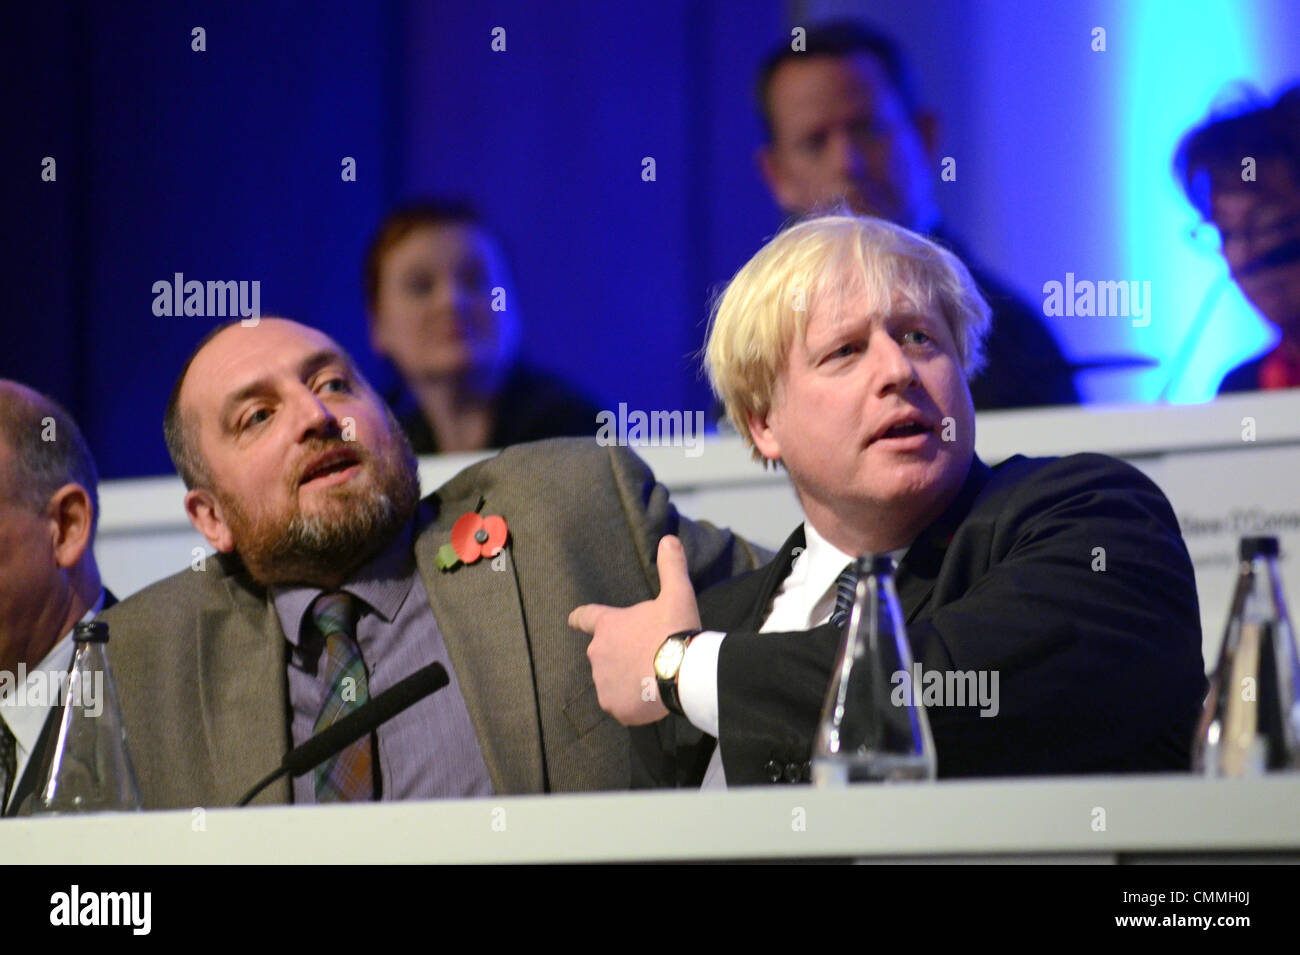 London, UK. 5th November 2013. Boris Johnson meets the Londoners at People's Question Time held at Imperial College London 05/11/2013 Credit:  JOHNNY ARMSTEAD/Alamy Live News Stock Photo